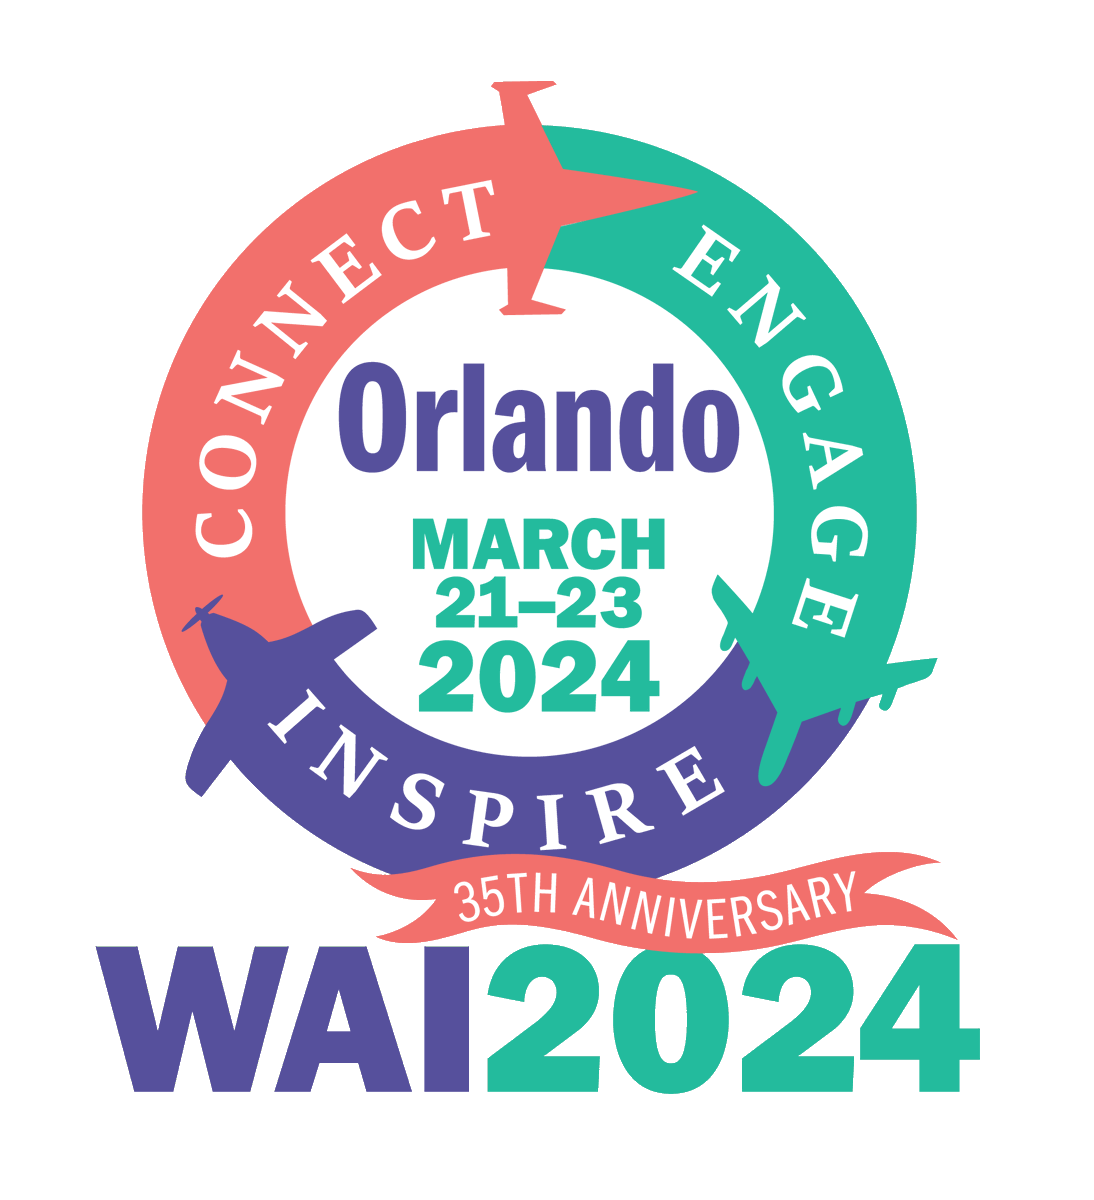 Excited to head to #WAI2024 for the @WomenInAviation conference. I’ll be in conversation with former shuttle commander and Deputy Director @NASA @Astro_Pam, and will emcee the Pioneer Hall of Fame ceremony.

#WomeninAviationInternational #IamWAI #WeAreWAI #WomeninAviation